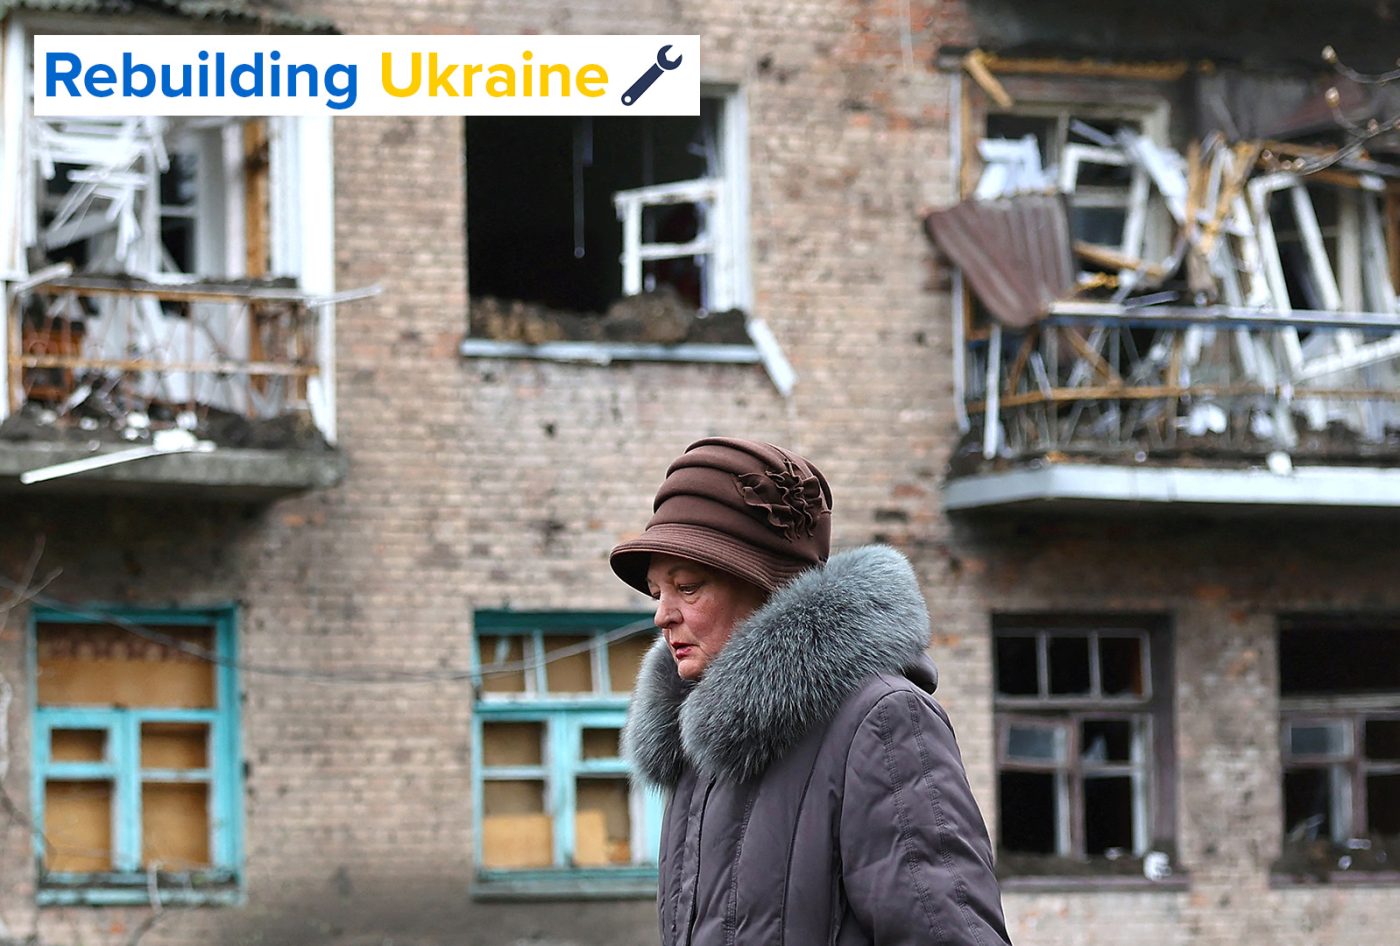 Photo: One of the few remaining villagers walks past a building damaged by recent shelling during heavy fighting at the frontline of Bakhmut and Chasiv Yar, in Chasiv Yar, Ukraine, April 12, 2023. Credit: REUTERS/Kai Pfaffenbach